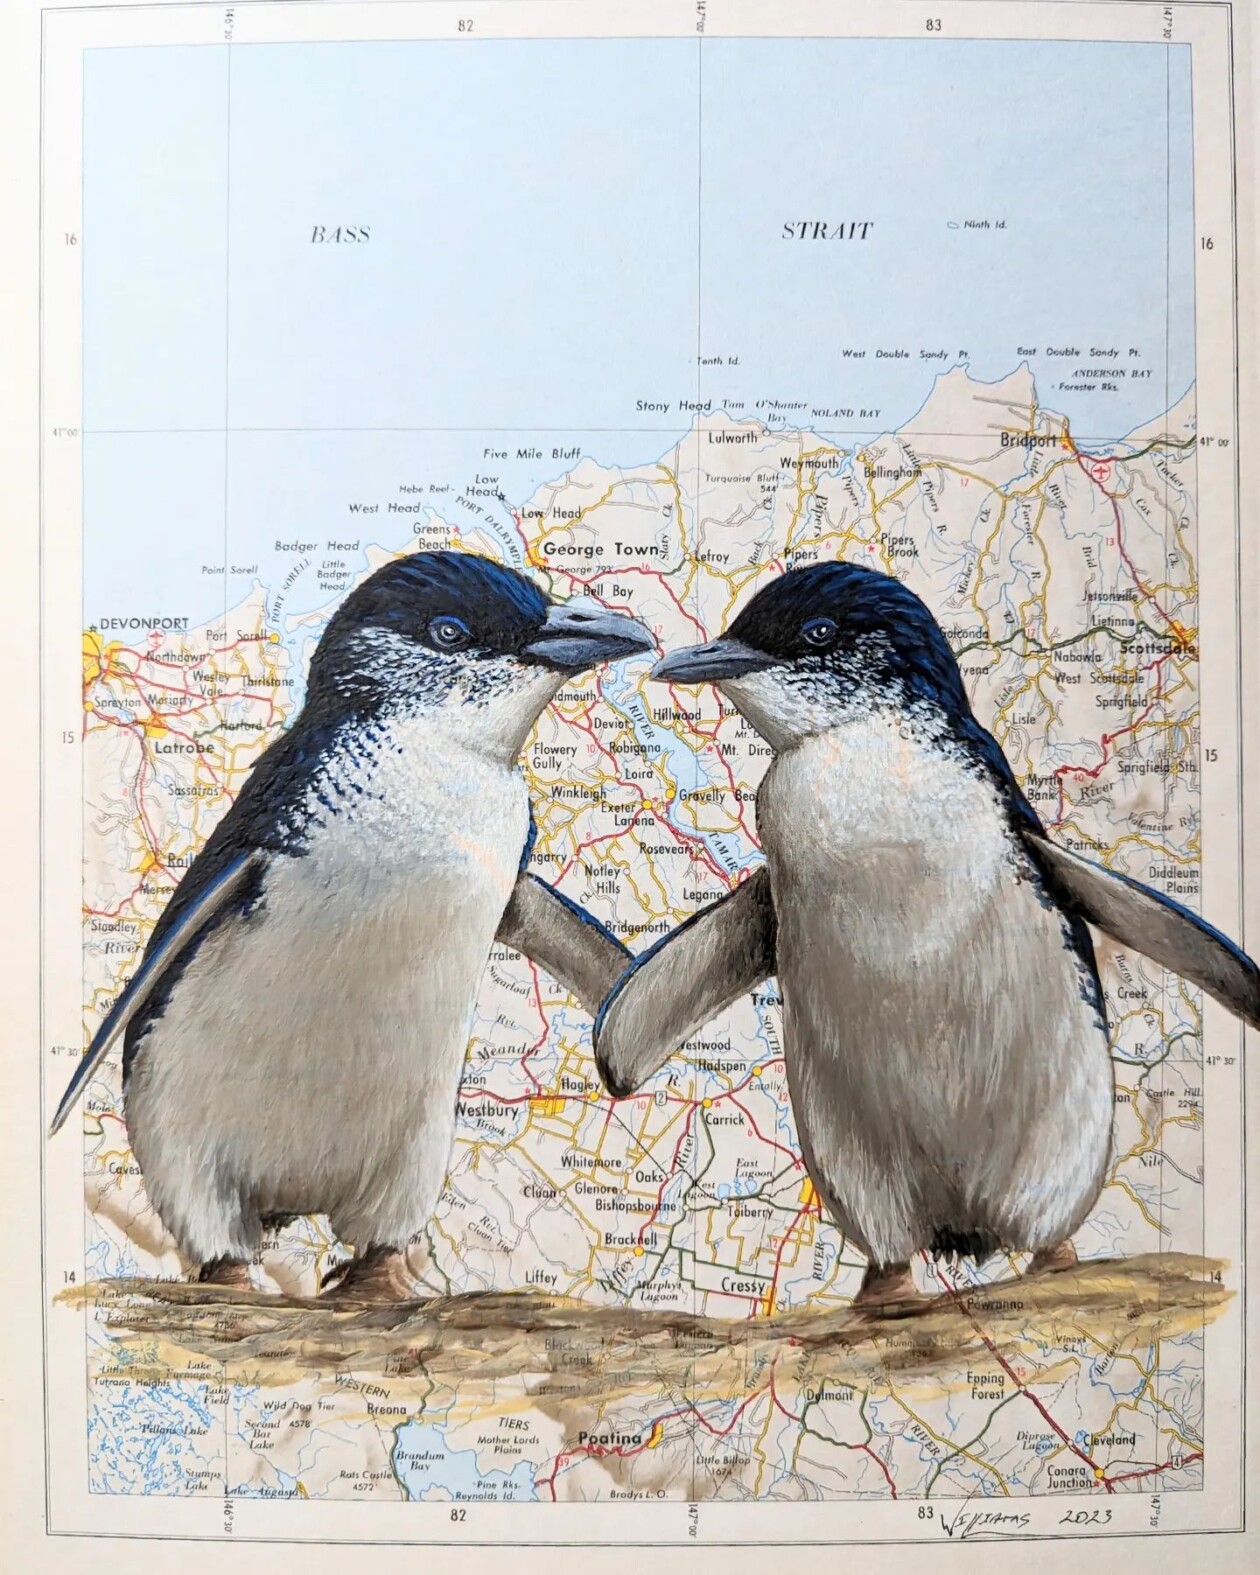 Exquisite Bird Paintings Added To Vintage Book Pages That Describe Them By Craig Williams (3)